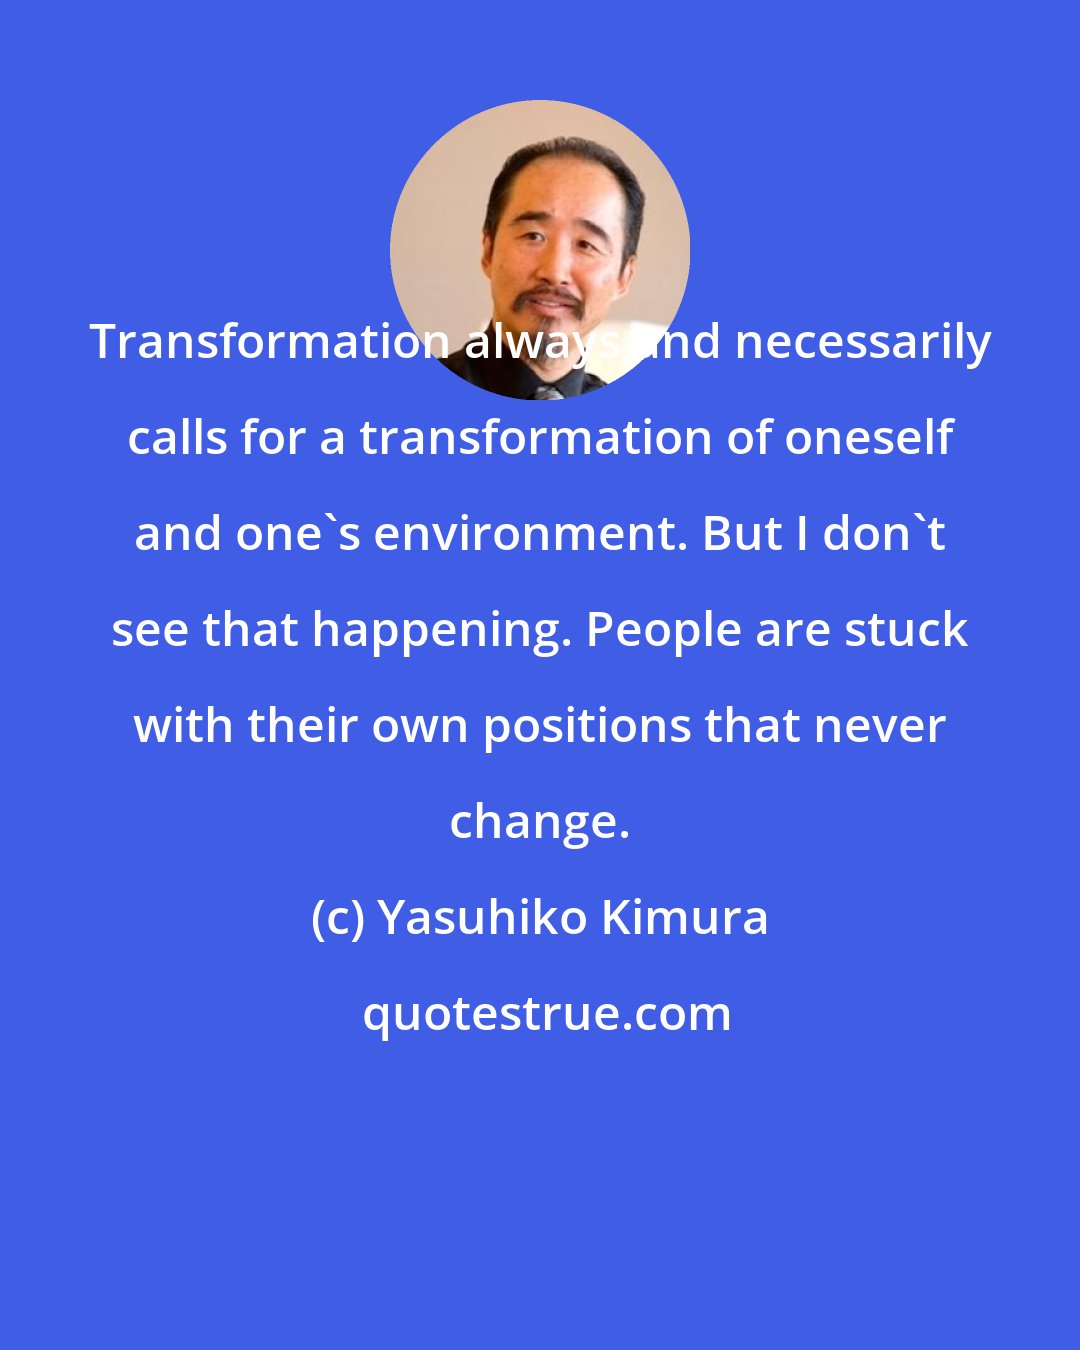 Yasuhiko Kimura: Transformation always and necessarily calls for a transformation of oneself and one's environment. But I don't see that happening. People are stuck with their own positions that never change.